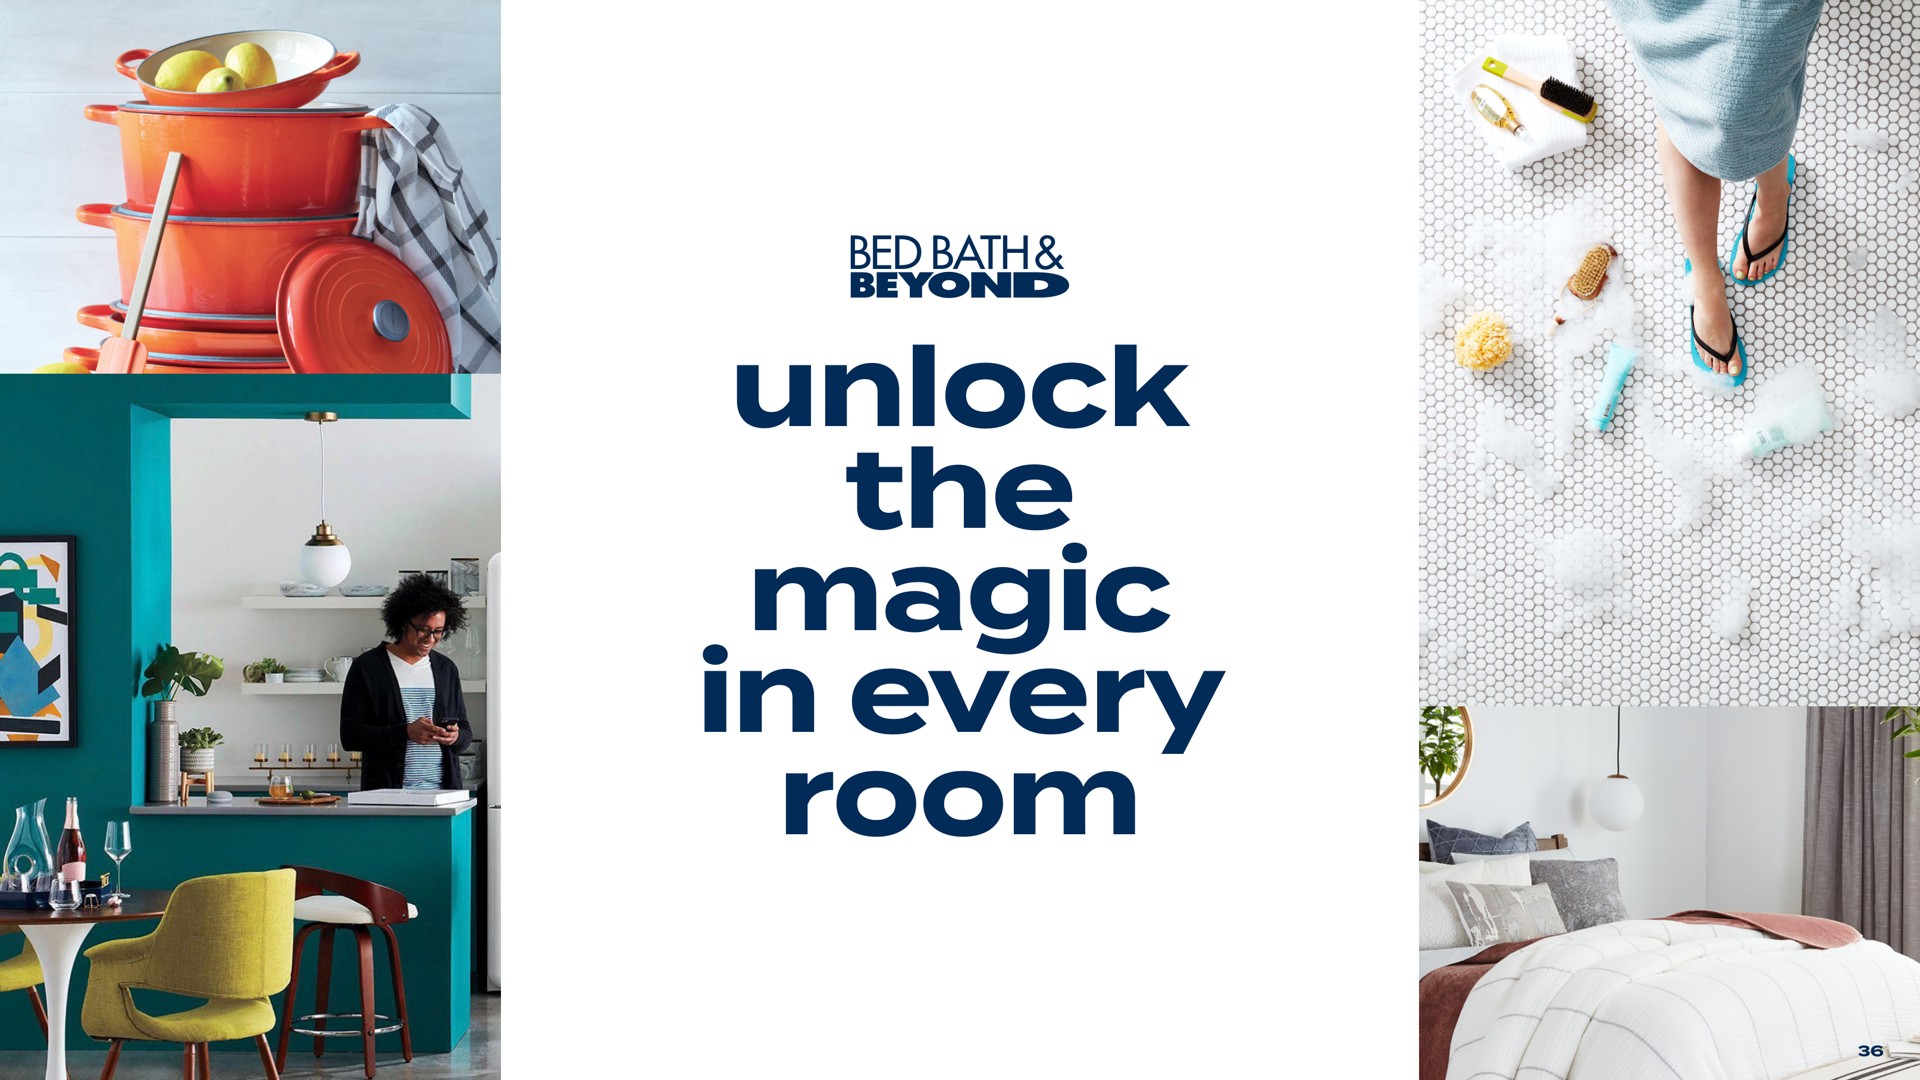 unlock the magic in every room | Bed Bath & Beyond